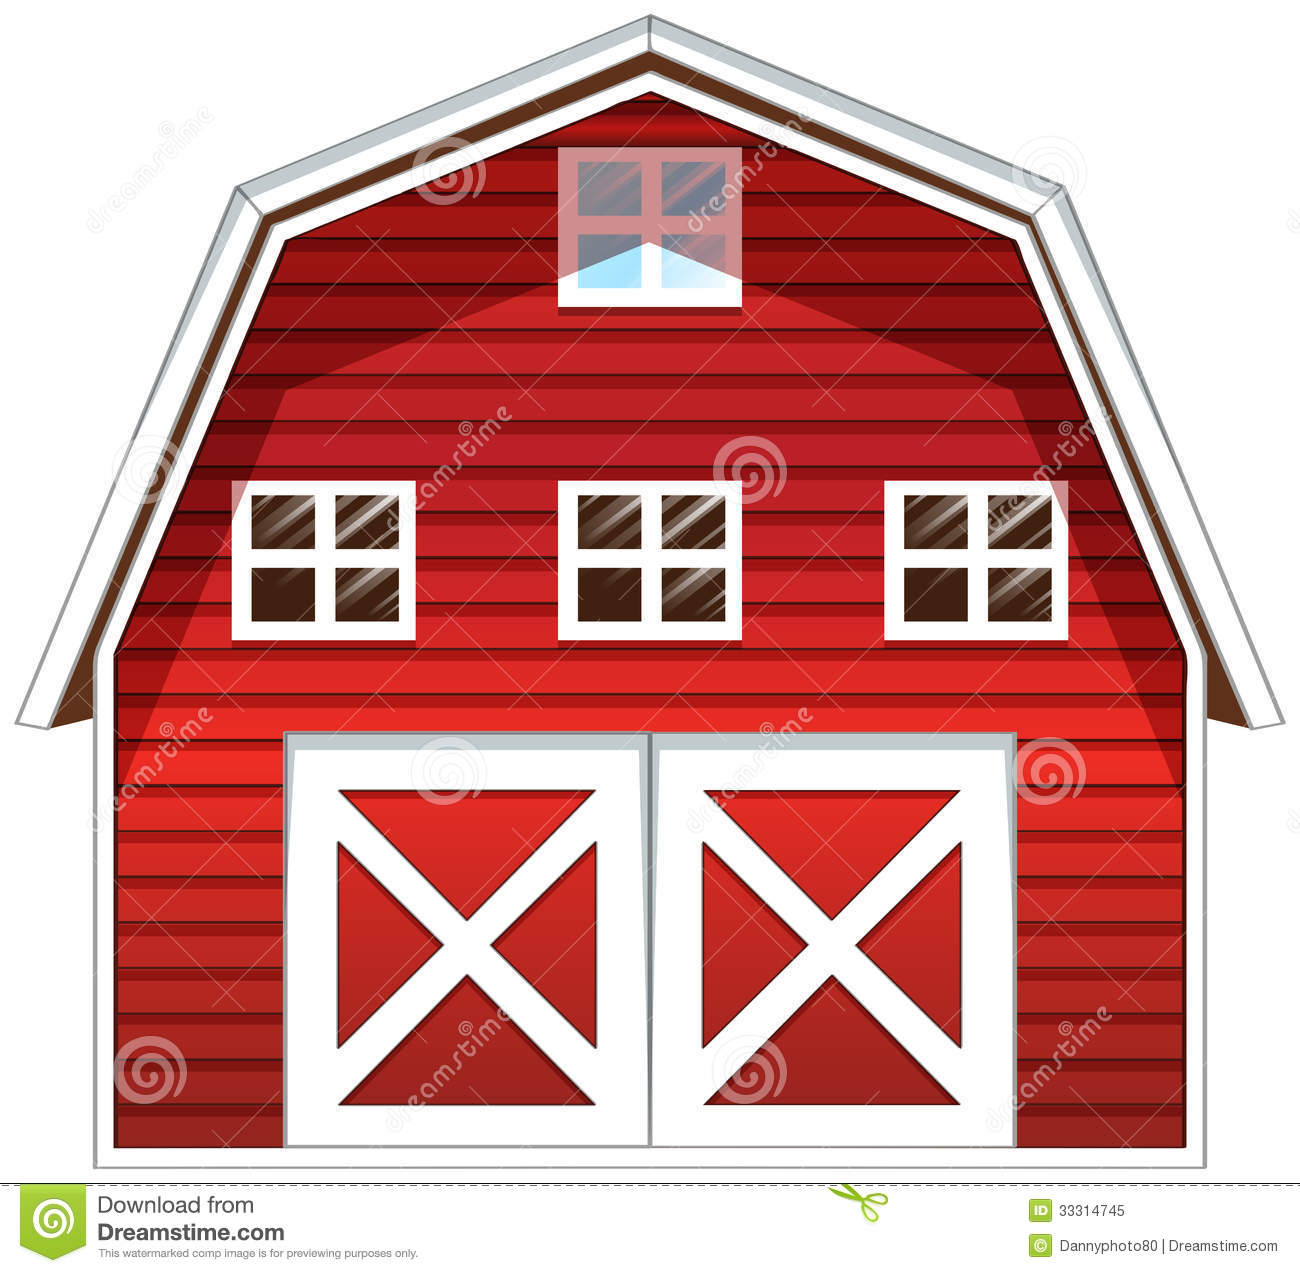 Red Barn House Royalty Free Stock Photo   Image  33314745